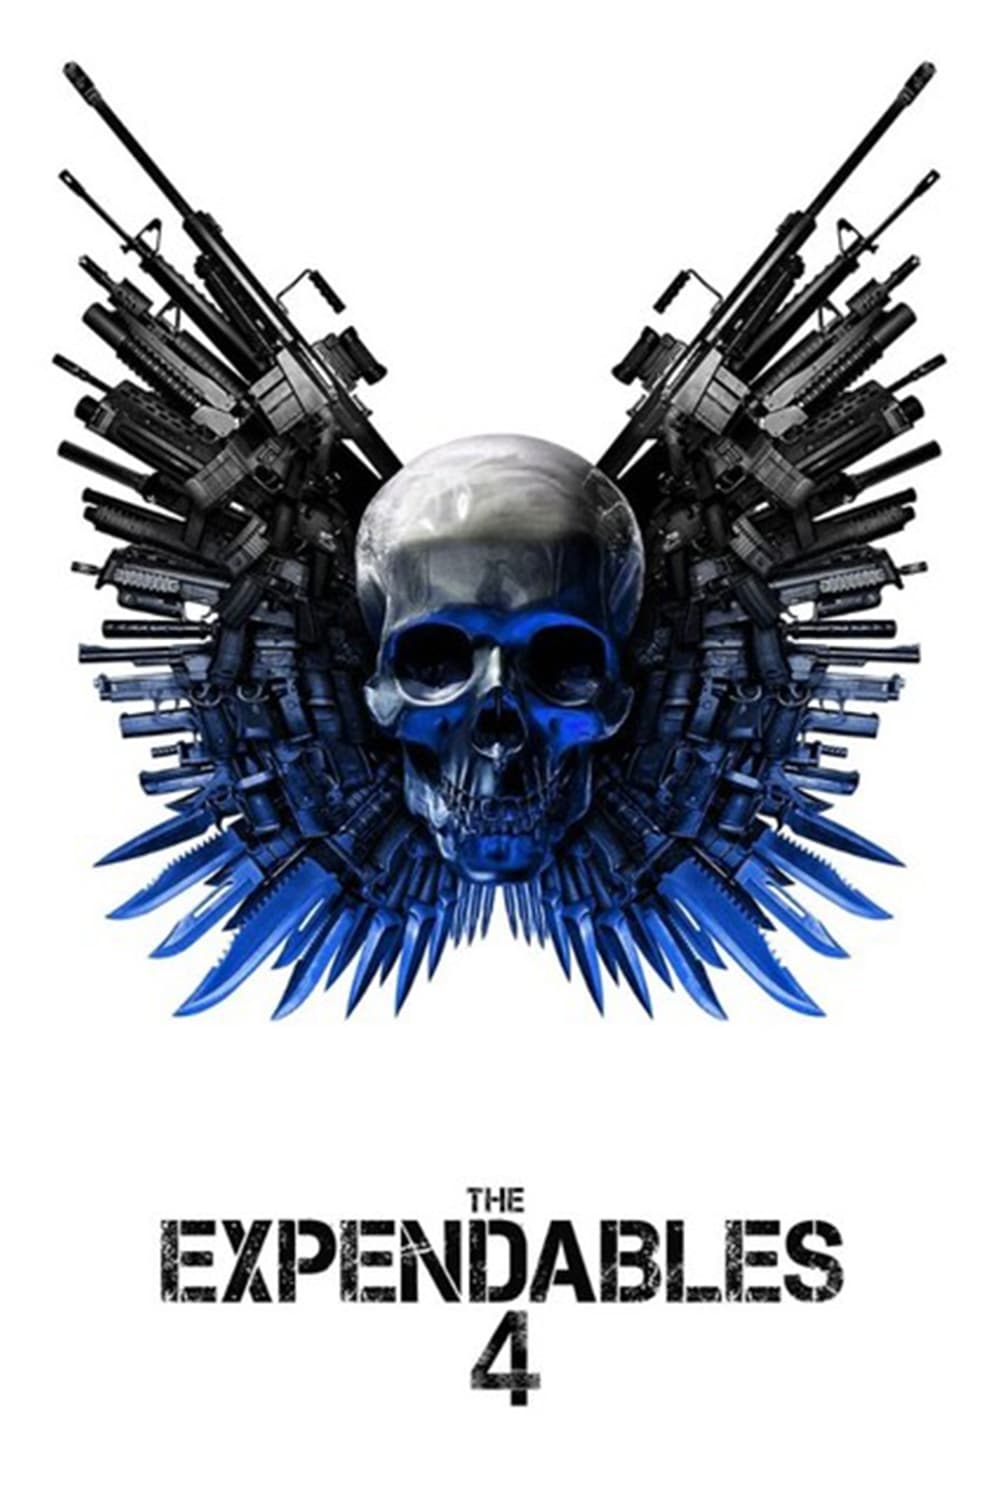 Poster for the movie "The Expendables 4"